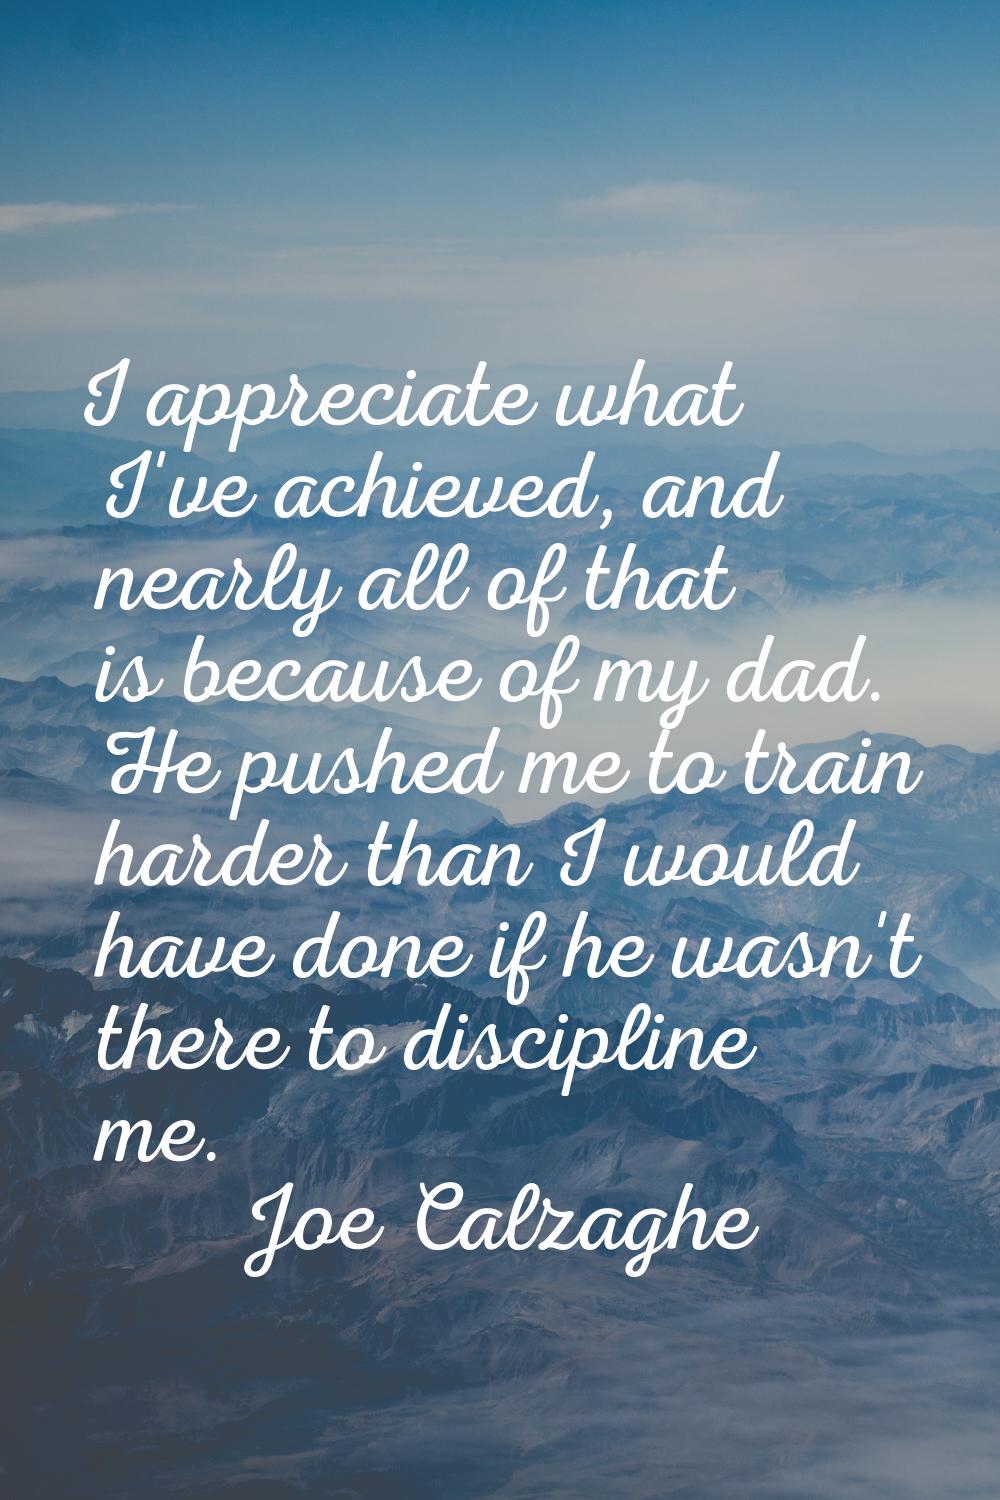 I appreciate what I've achieved, and nearly all of that is because of my dad. He pushed me to train